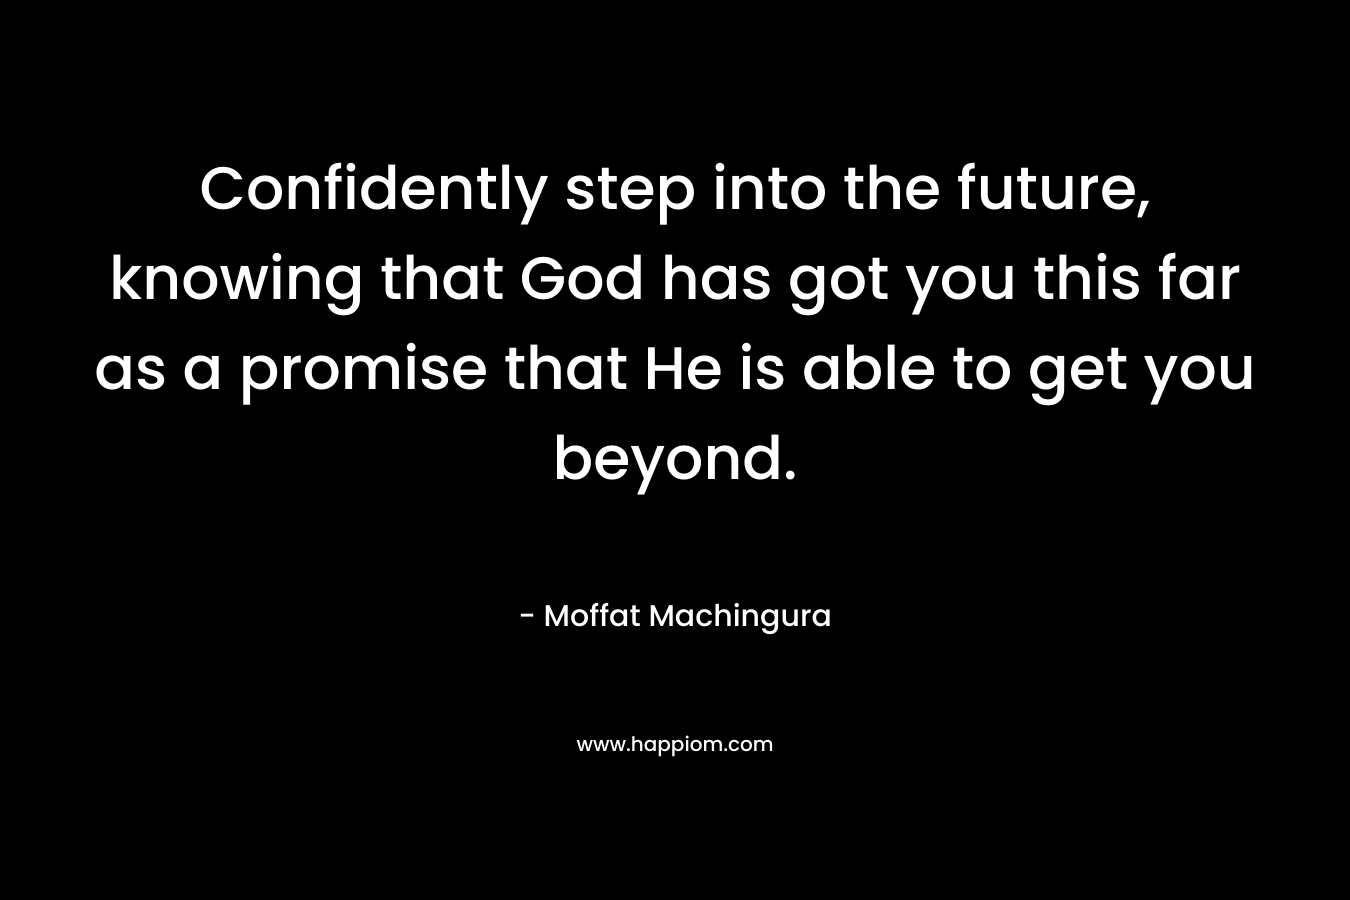 Confidently step into the future, knowing that God has got you this far as a promise that He is able to get you beyond.